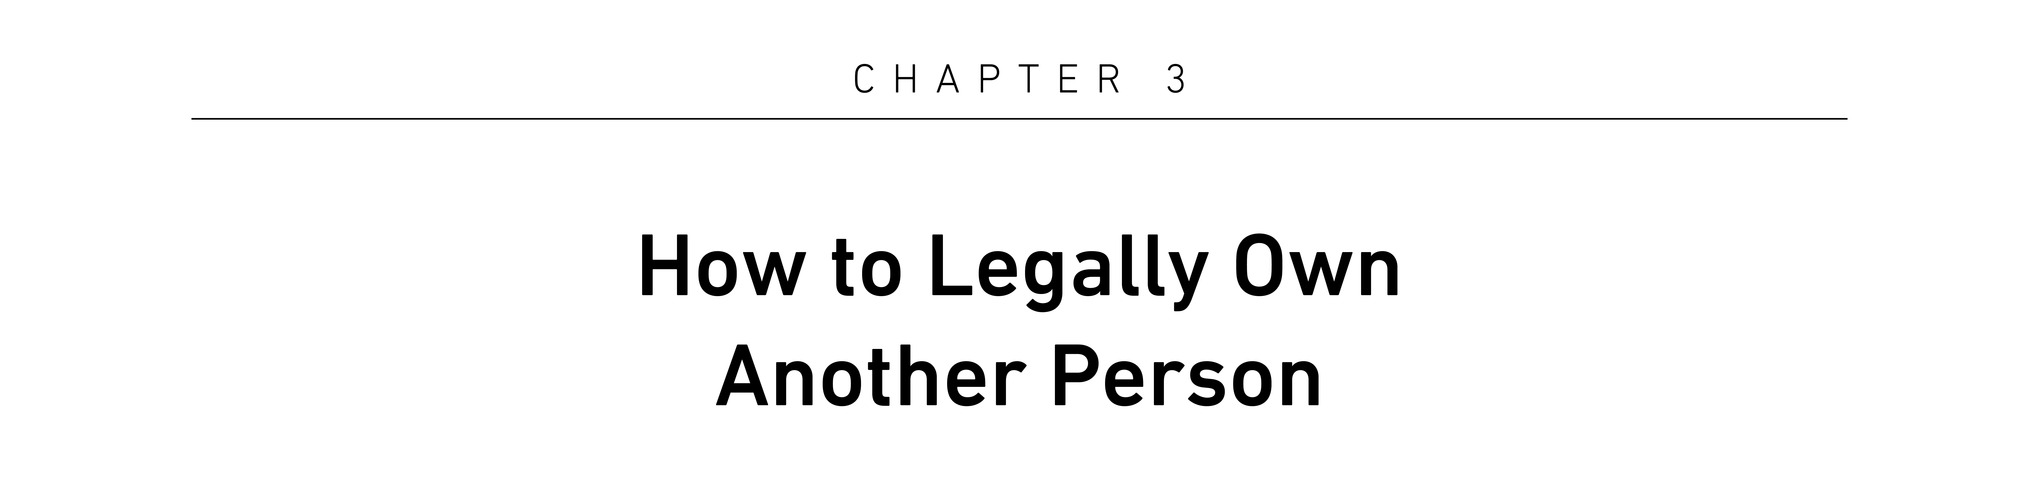 Chapter 3 How to Legally Own Another Person